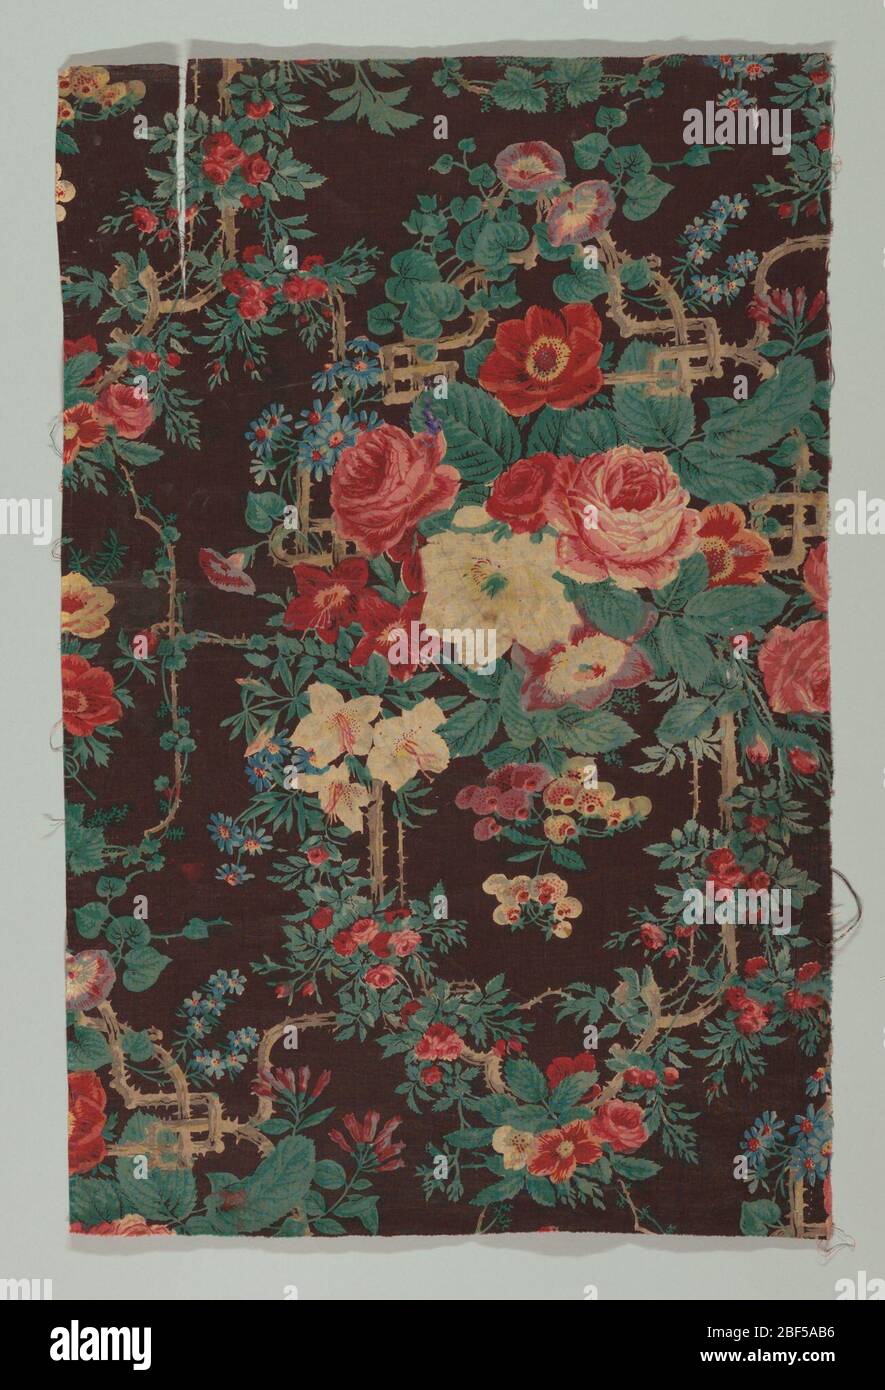 Textile. Large bouquet of roses with smaller climbing rose brances and other flowers. Background of dark brown and floral pattern in shades of red, green, blue and white. Stock Photo